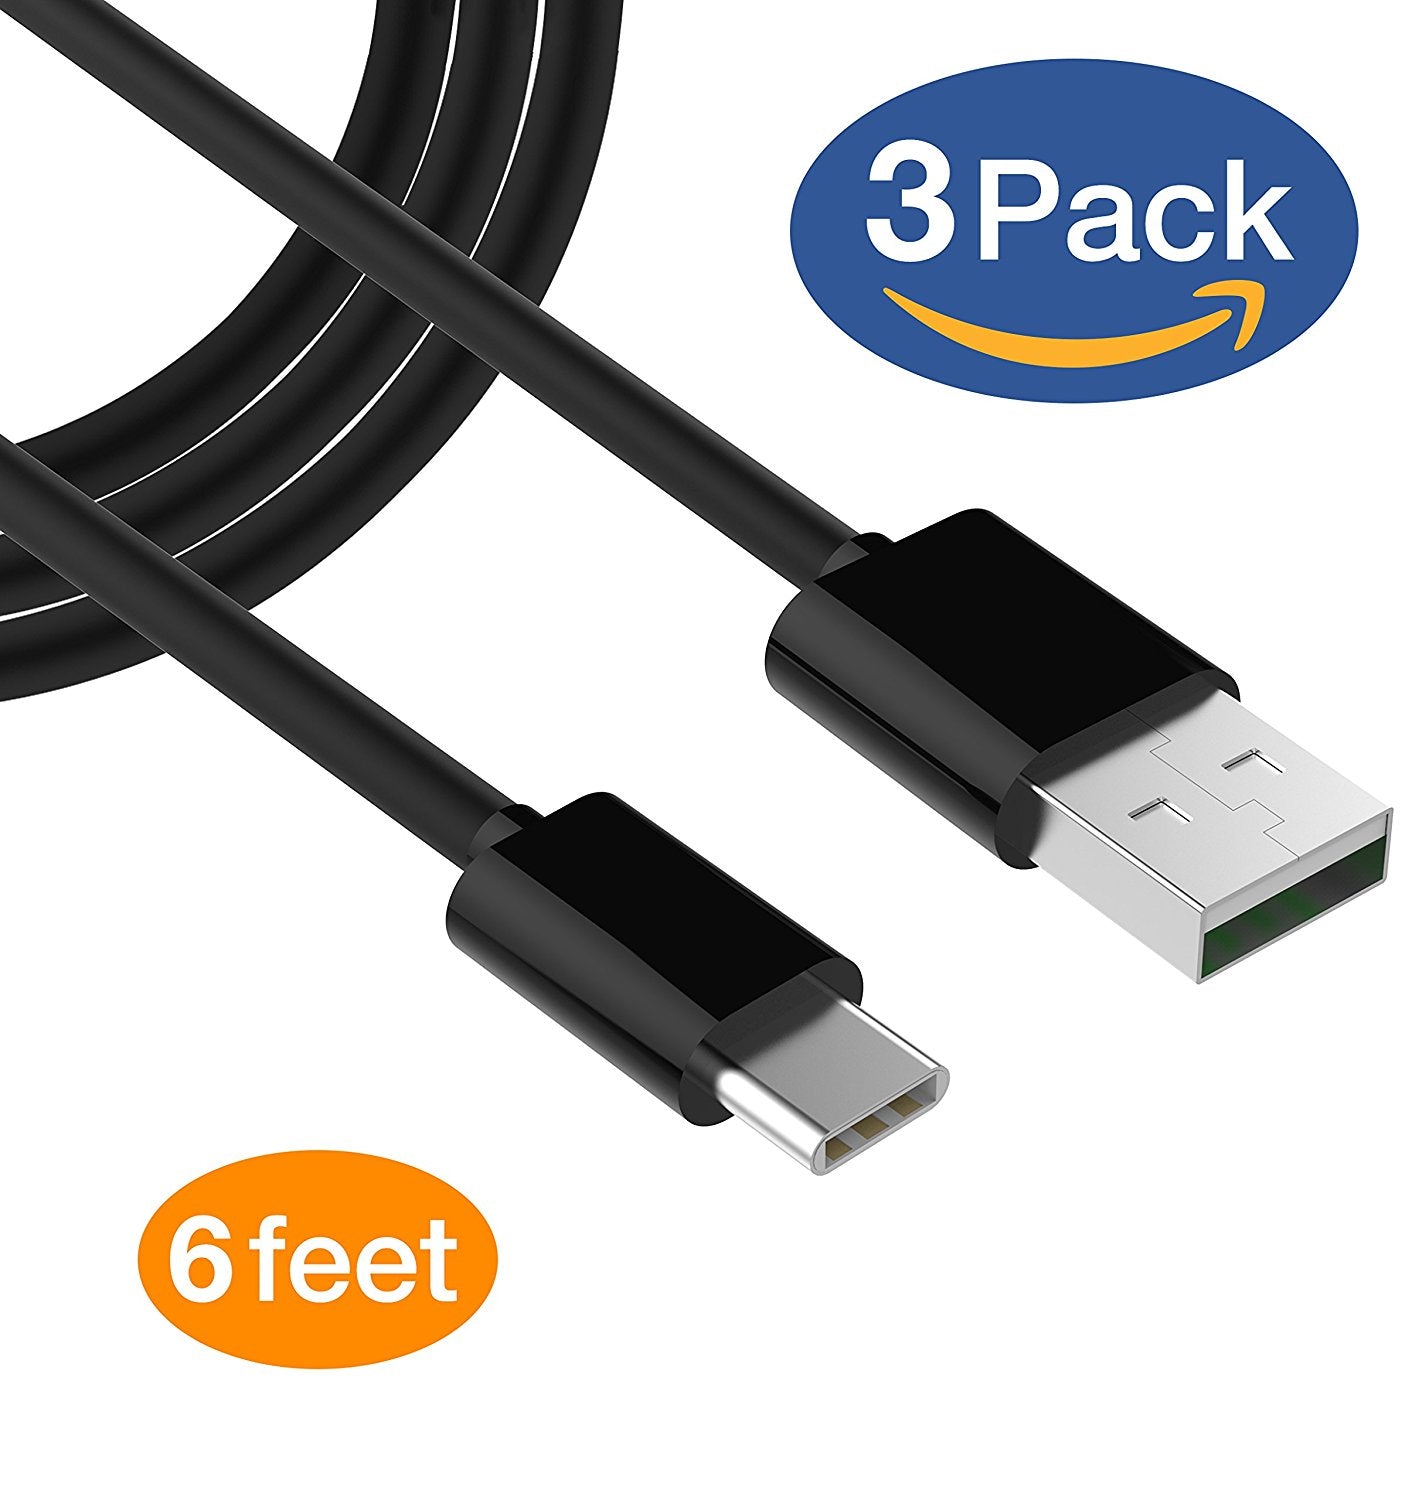 USB Type C Cable 3 ft Fast Charger Charging Cable Cord Compatible with any USB-C enabled device. Pack of 3